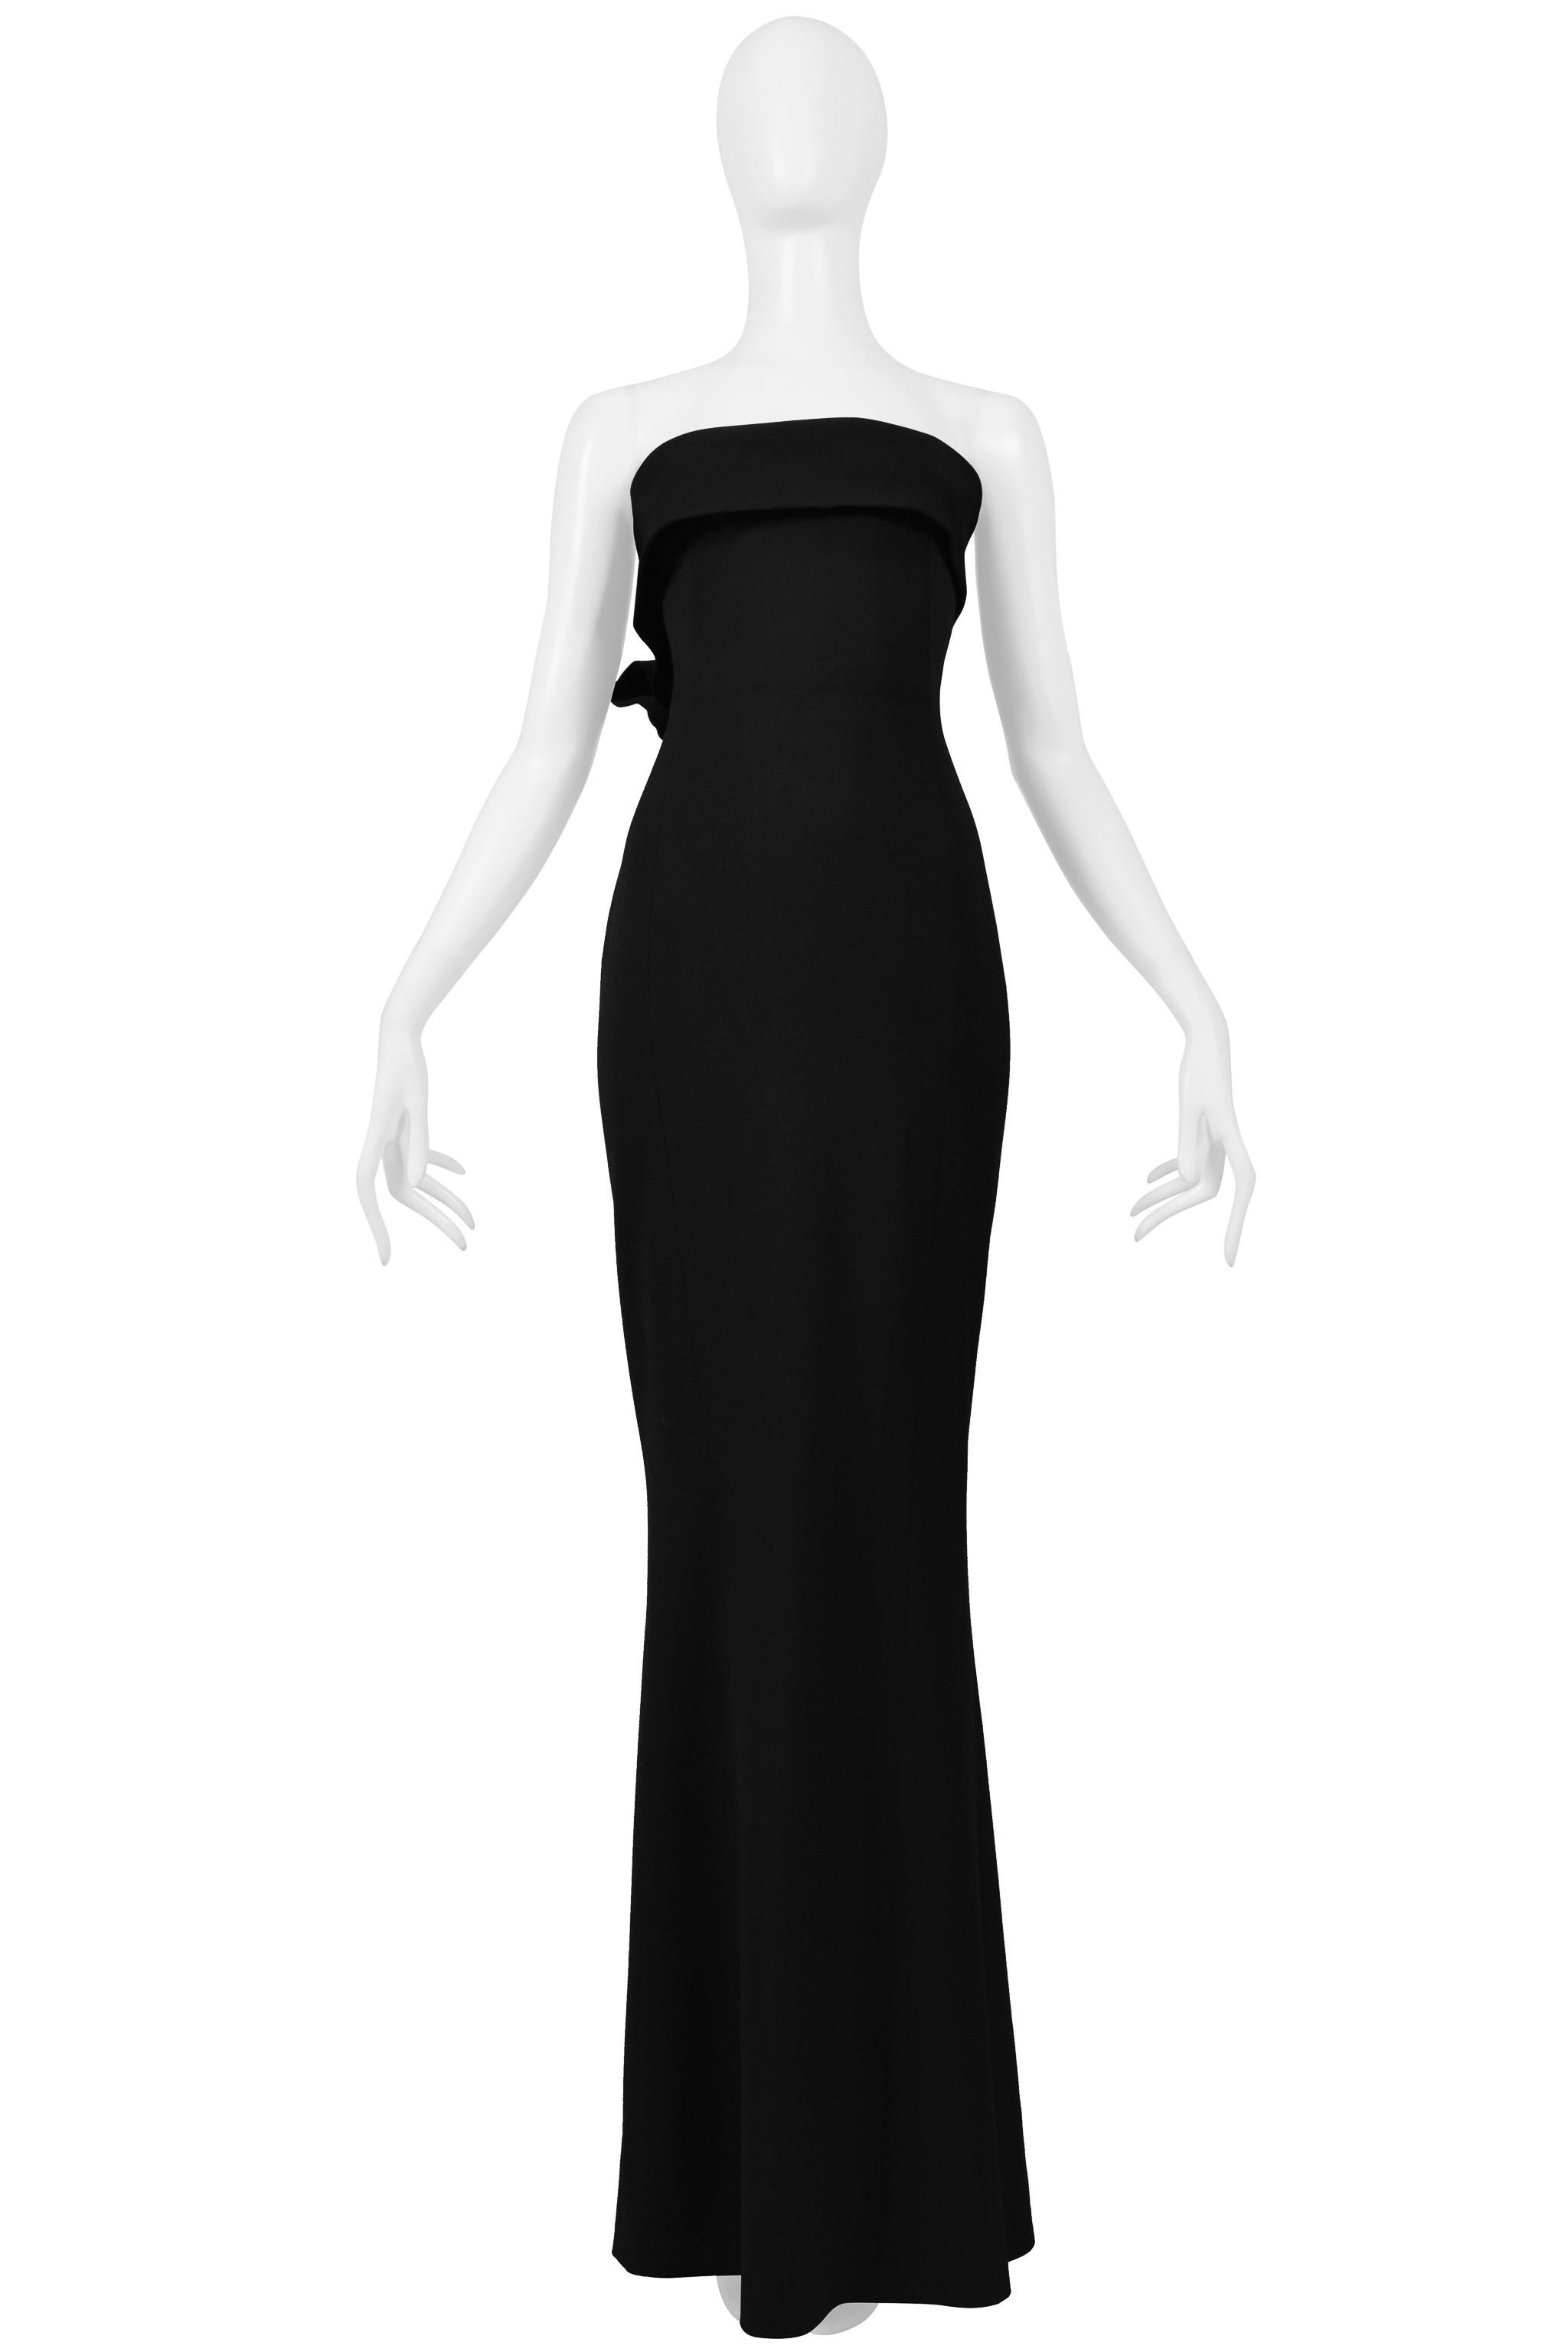 Dsquared Black Strapless Evening Gown With Bow 2014 For Sale 1